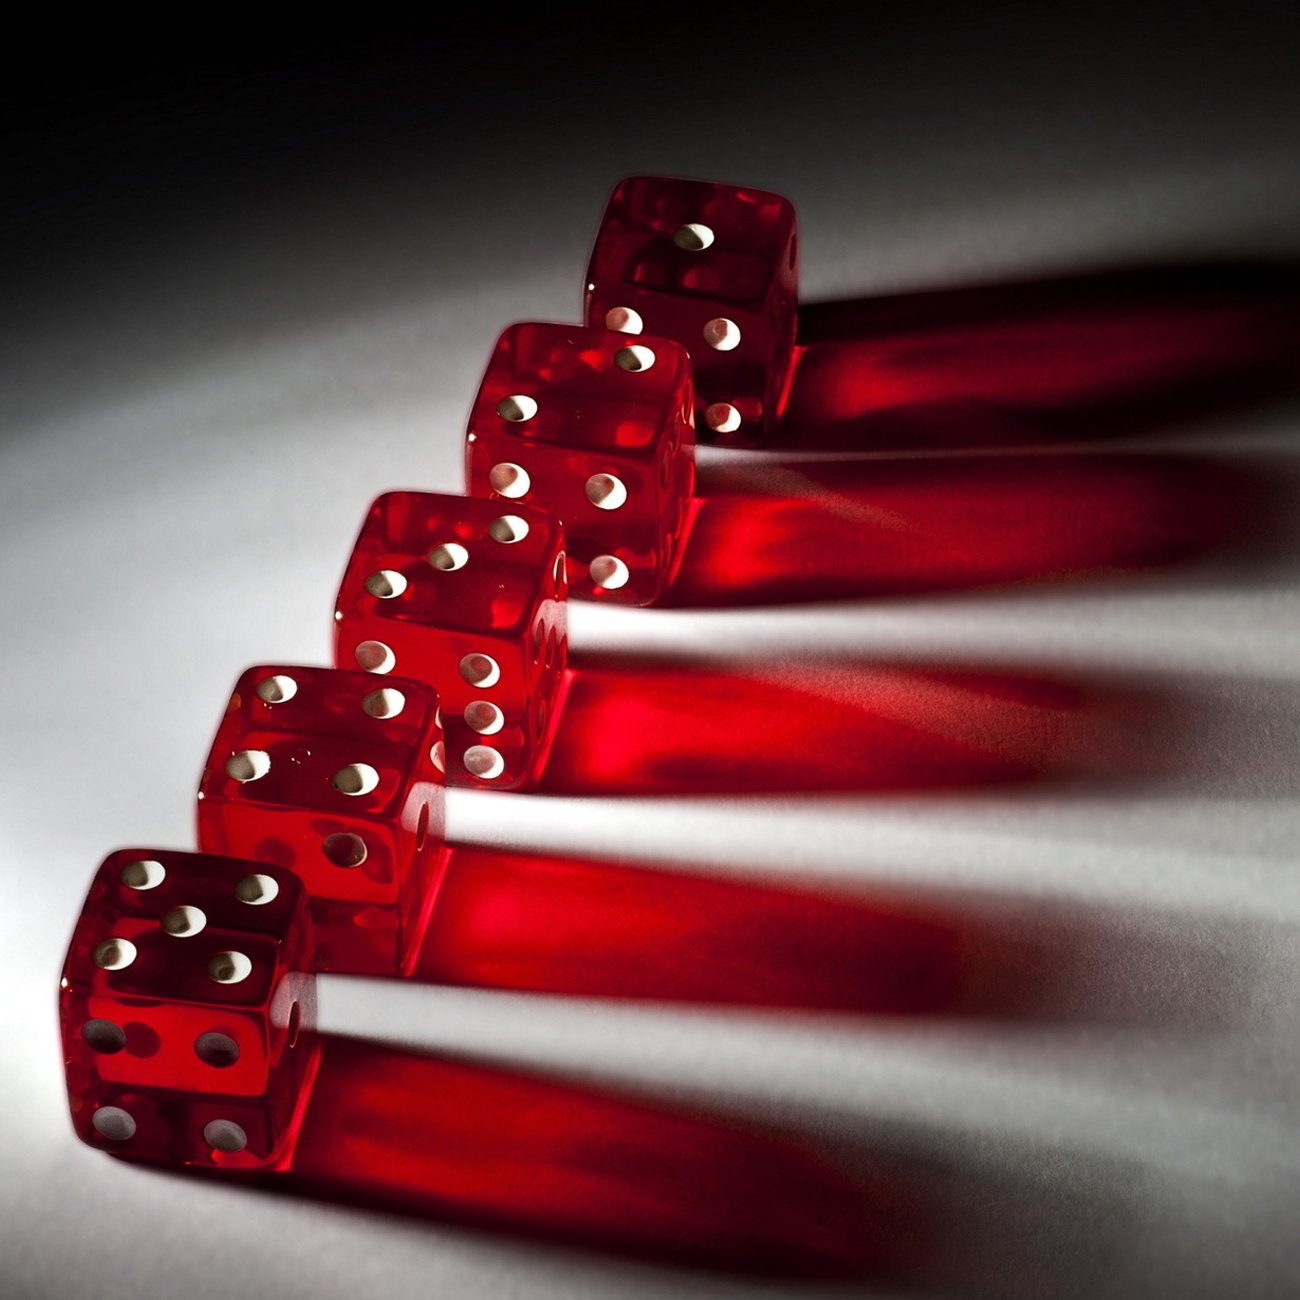 Chainbet Protocol Adds Trustless Multiplayer Bets, Auctions, and Dice Rolls